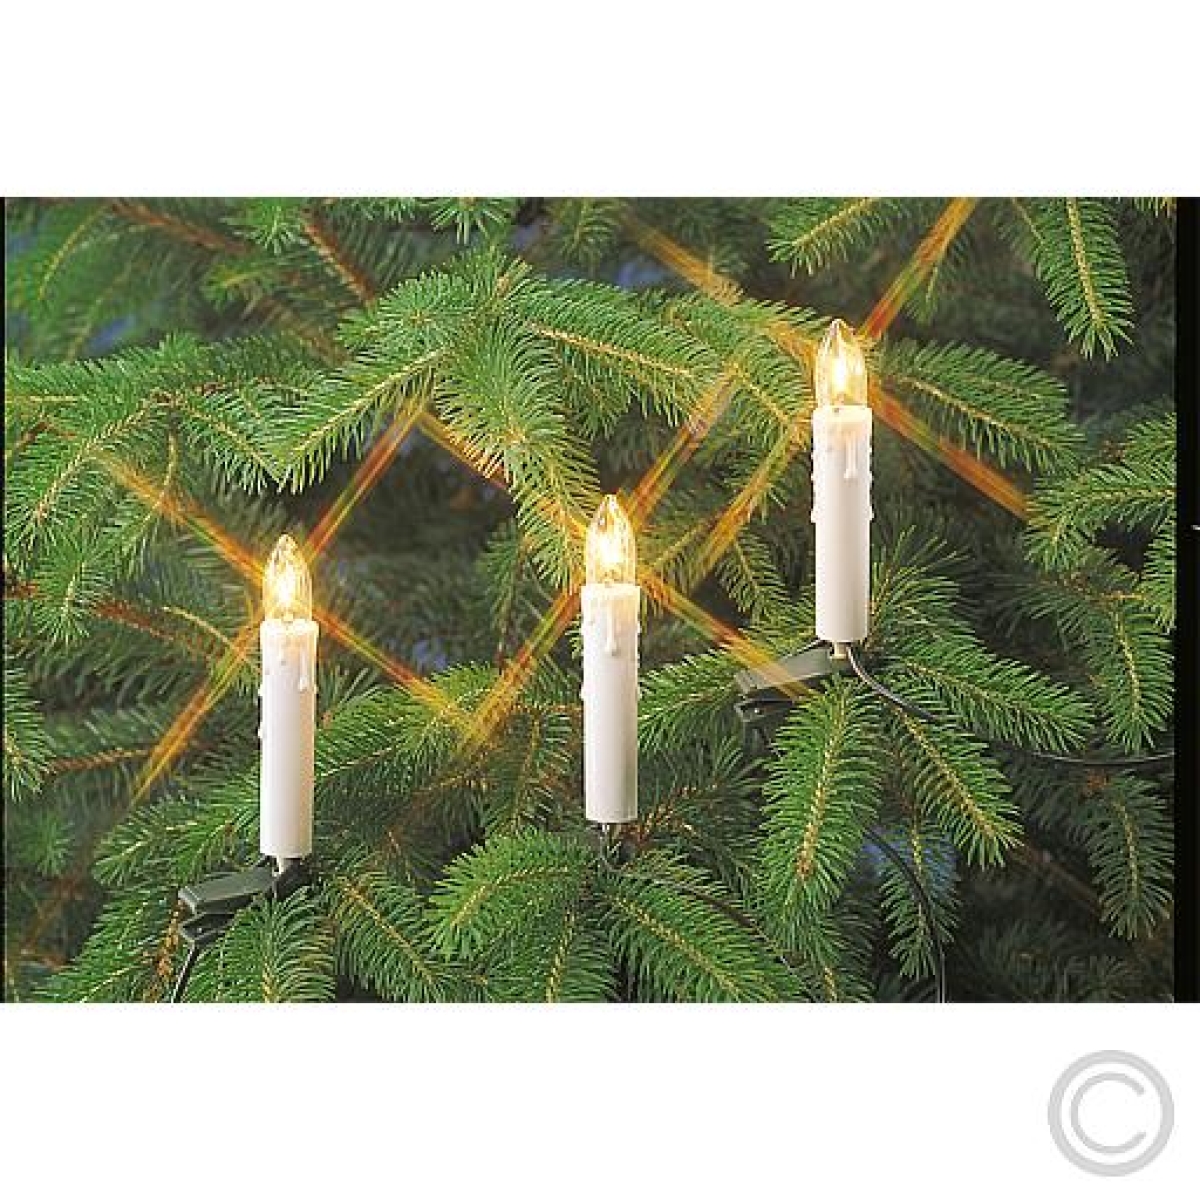 EGBInner chain with 20 LED top candles, illuminated length 7.6m, total length 9.1m 12V/0.1W warm whiteArticle-No: 865410